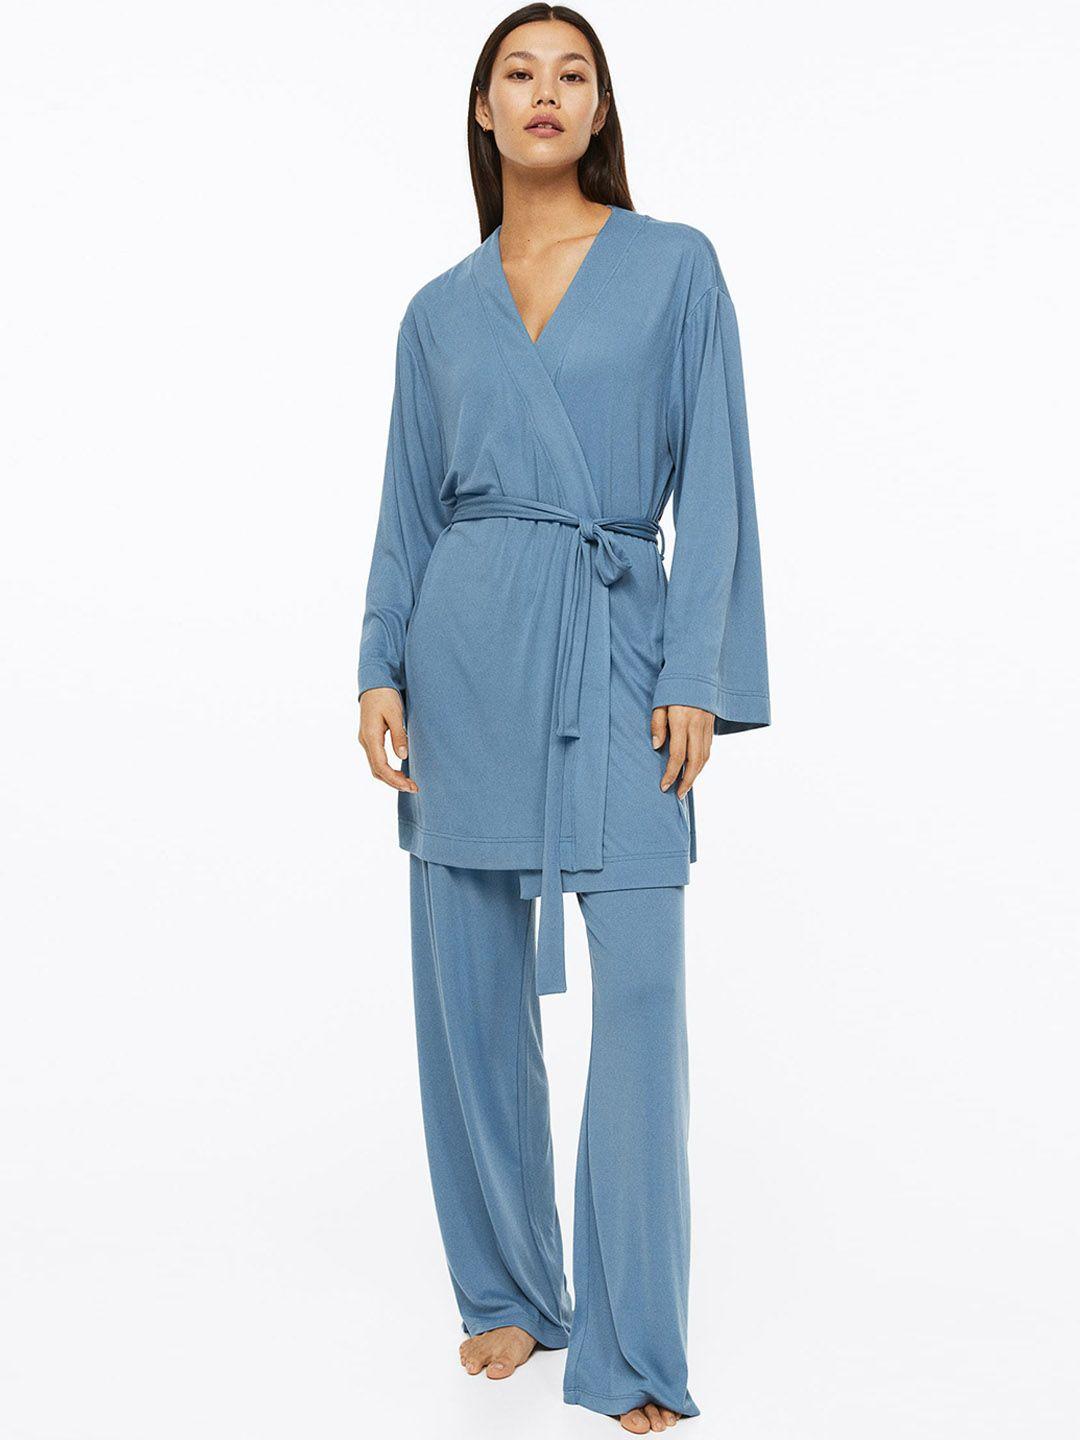 h&m jersey dressing gown